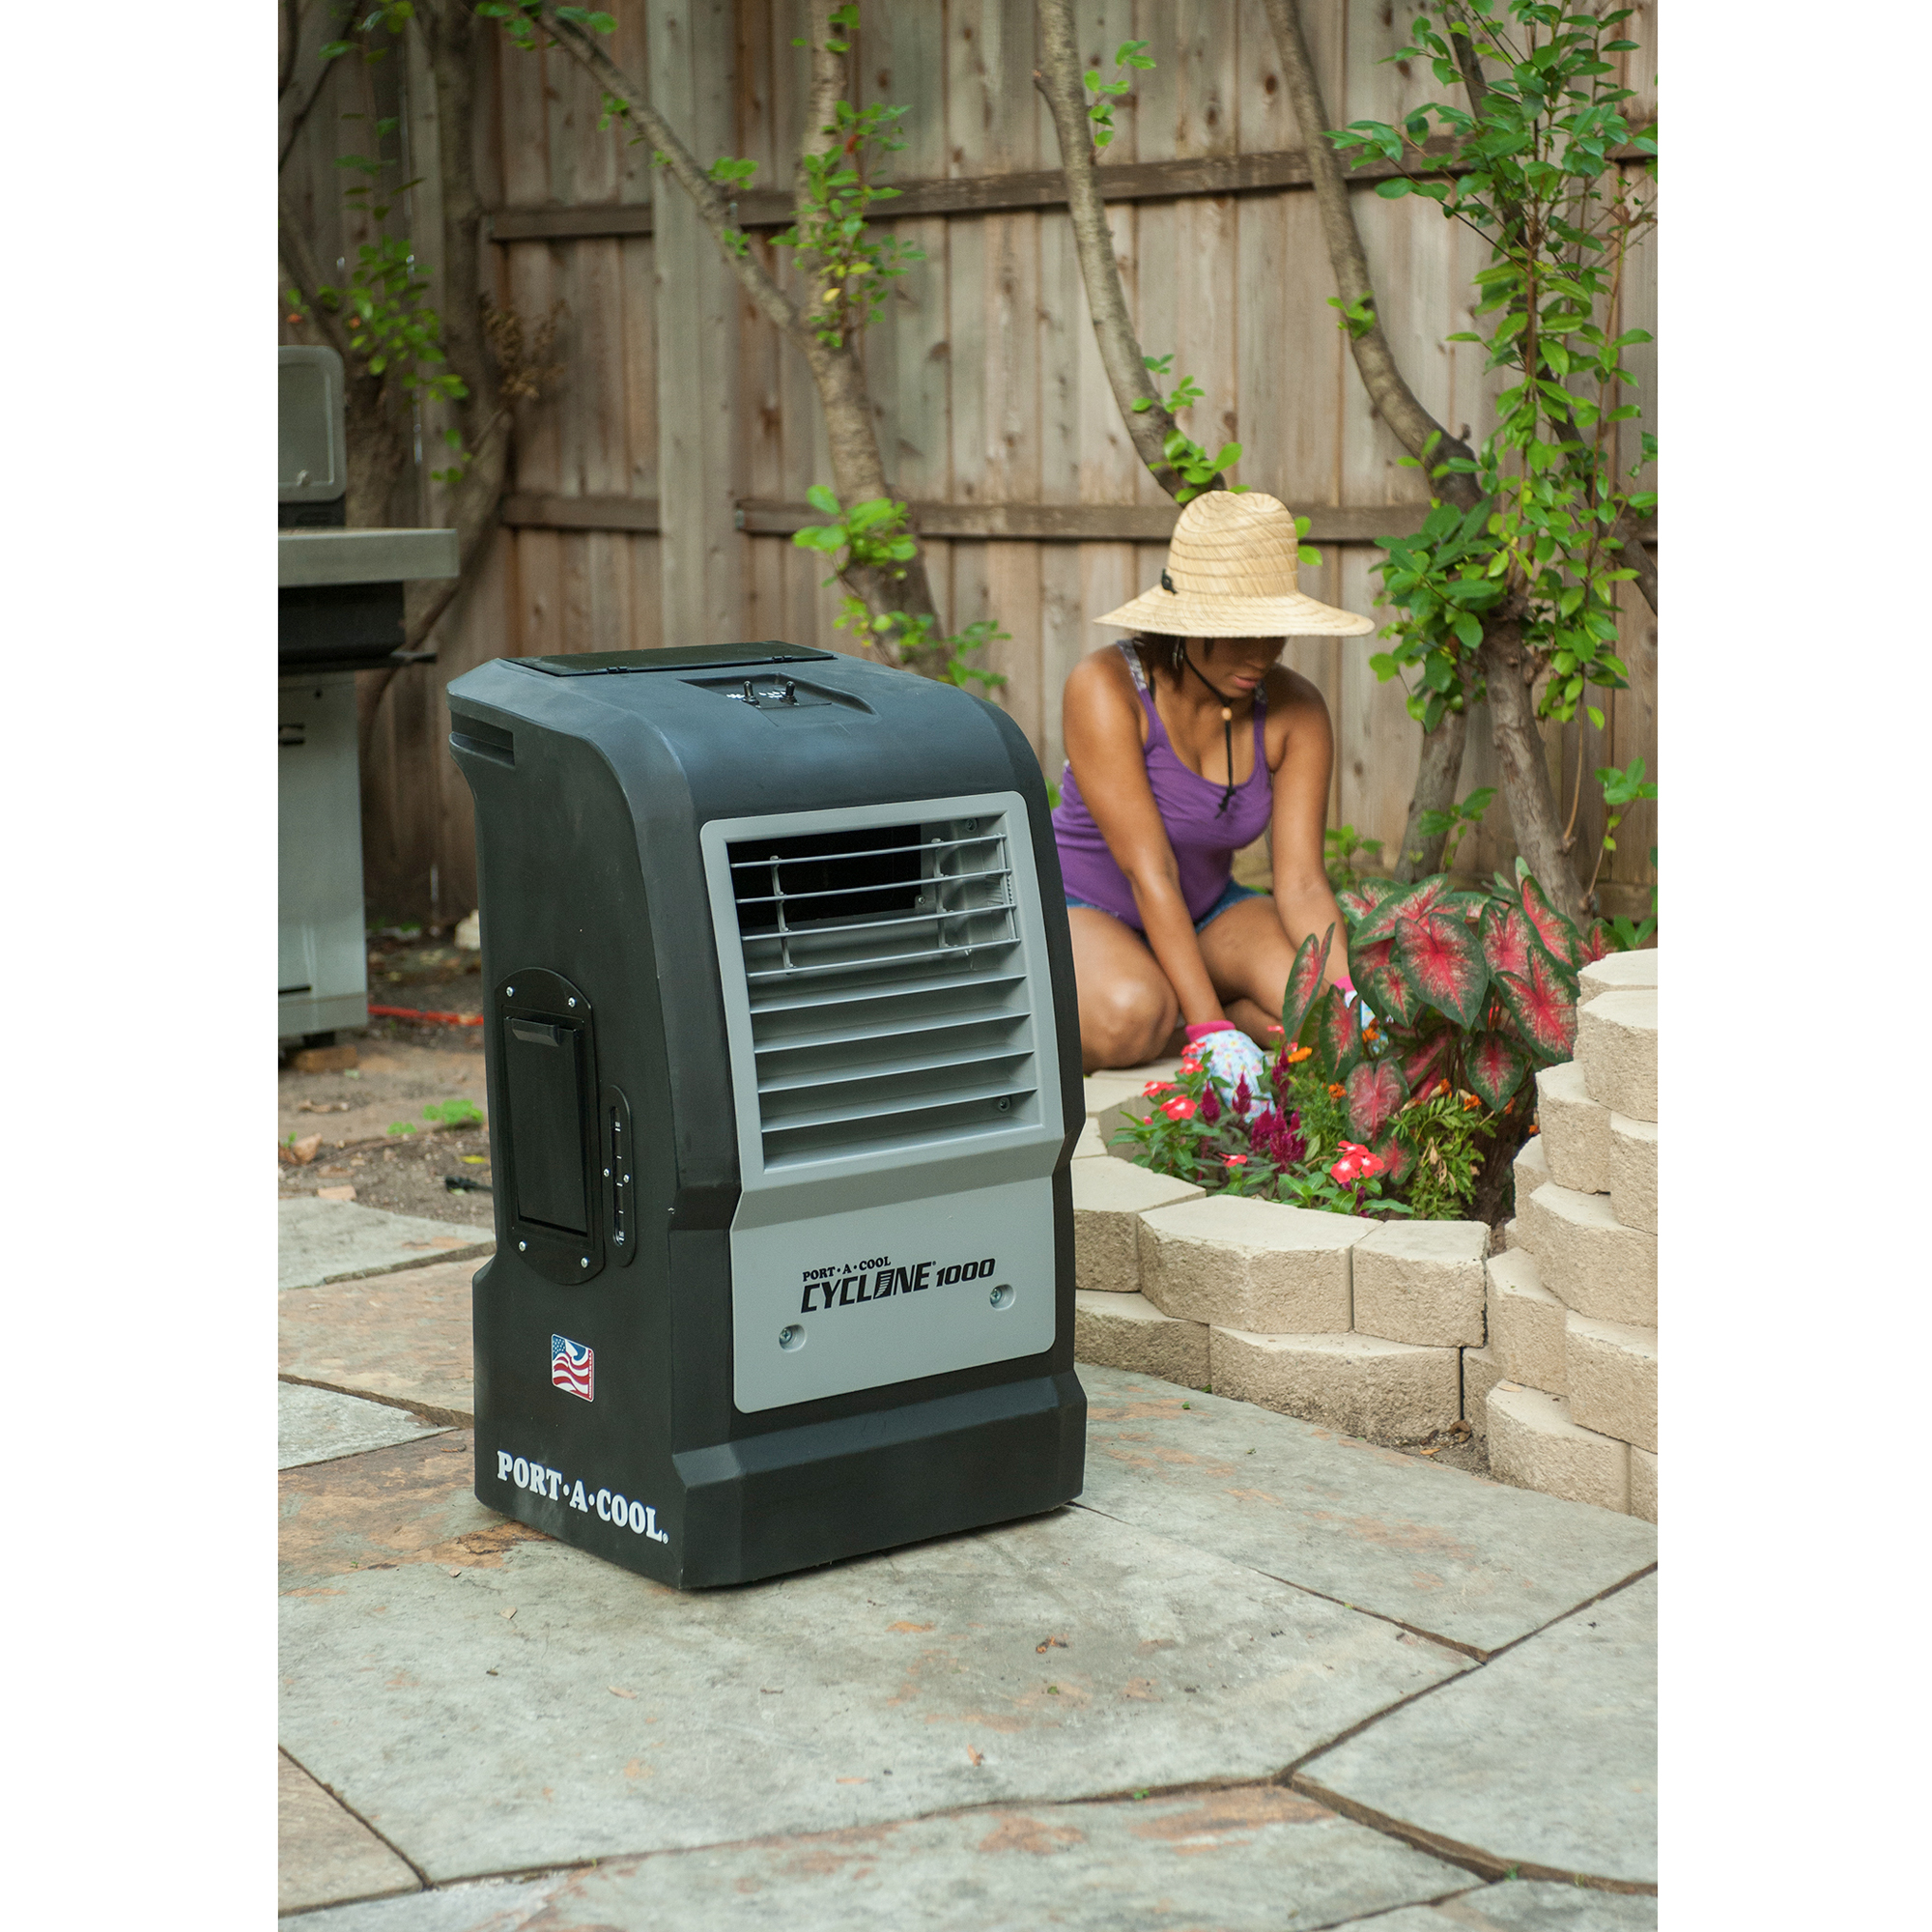 Port-A-Cool Cyclone 1000 Portable Evaporative Cooling Unit, Black - image 4 of 8